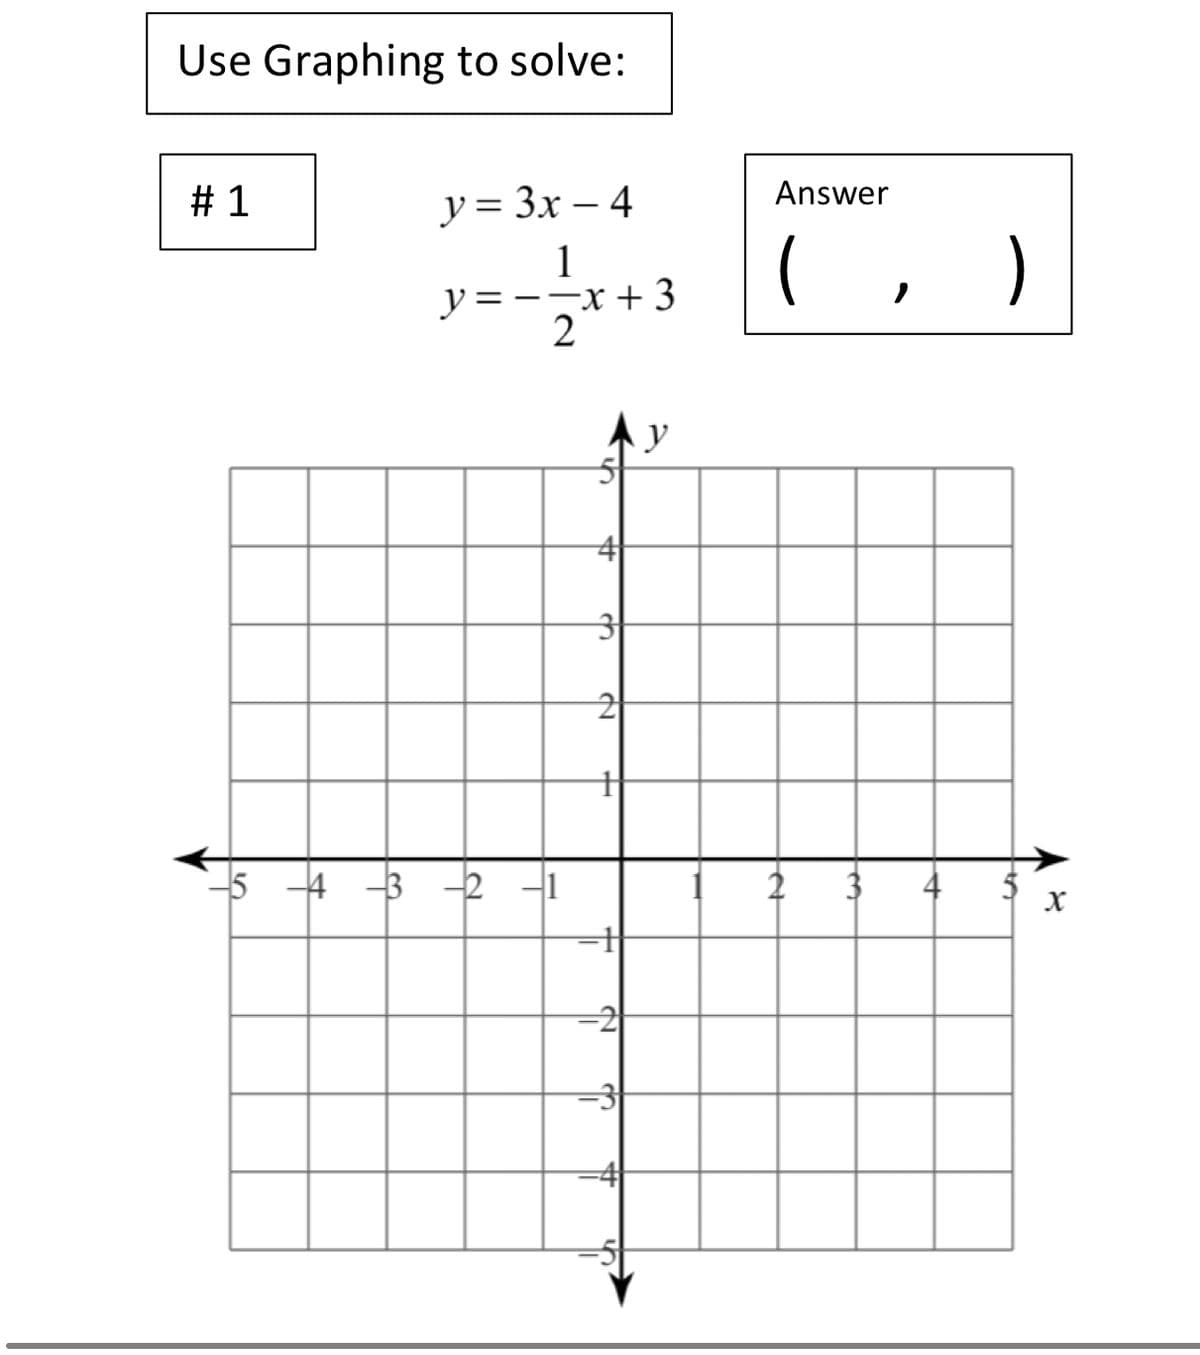 Use Graphing to solve:
Answer
y= 3x – 4
)
1
y:
3
4
-3
-2
4
=3
%24
||
%23
